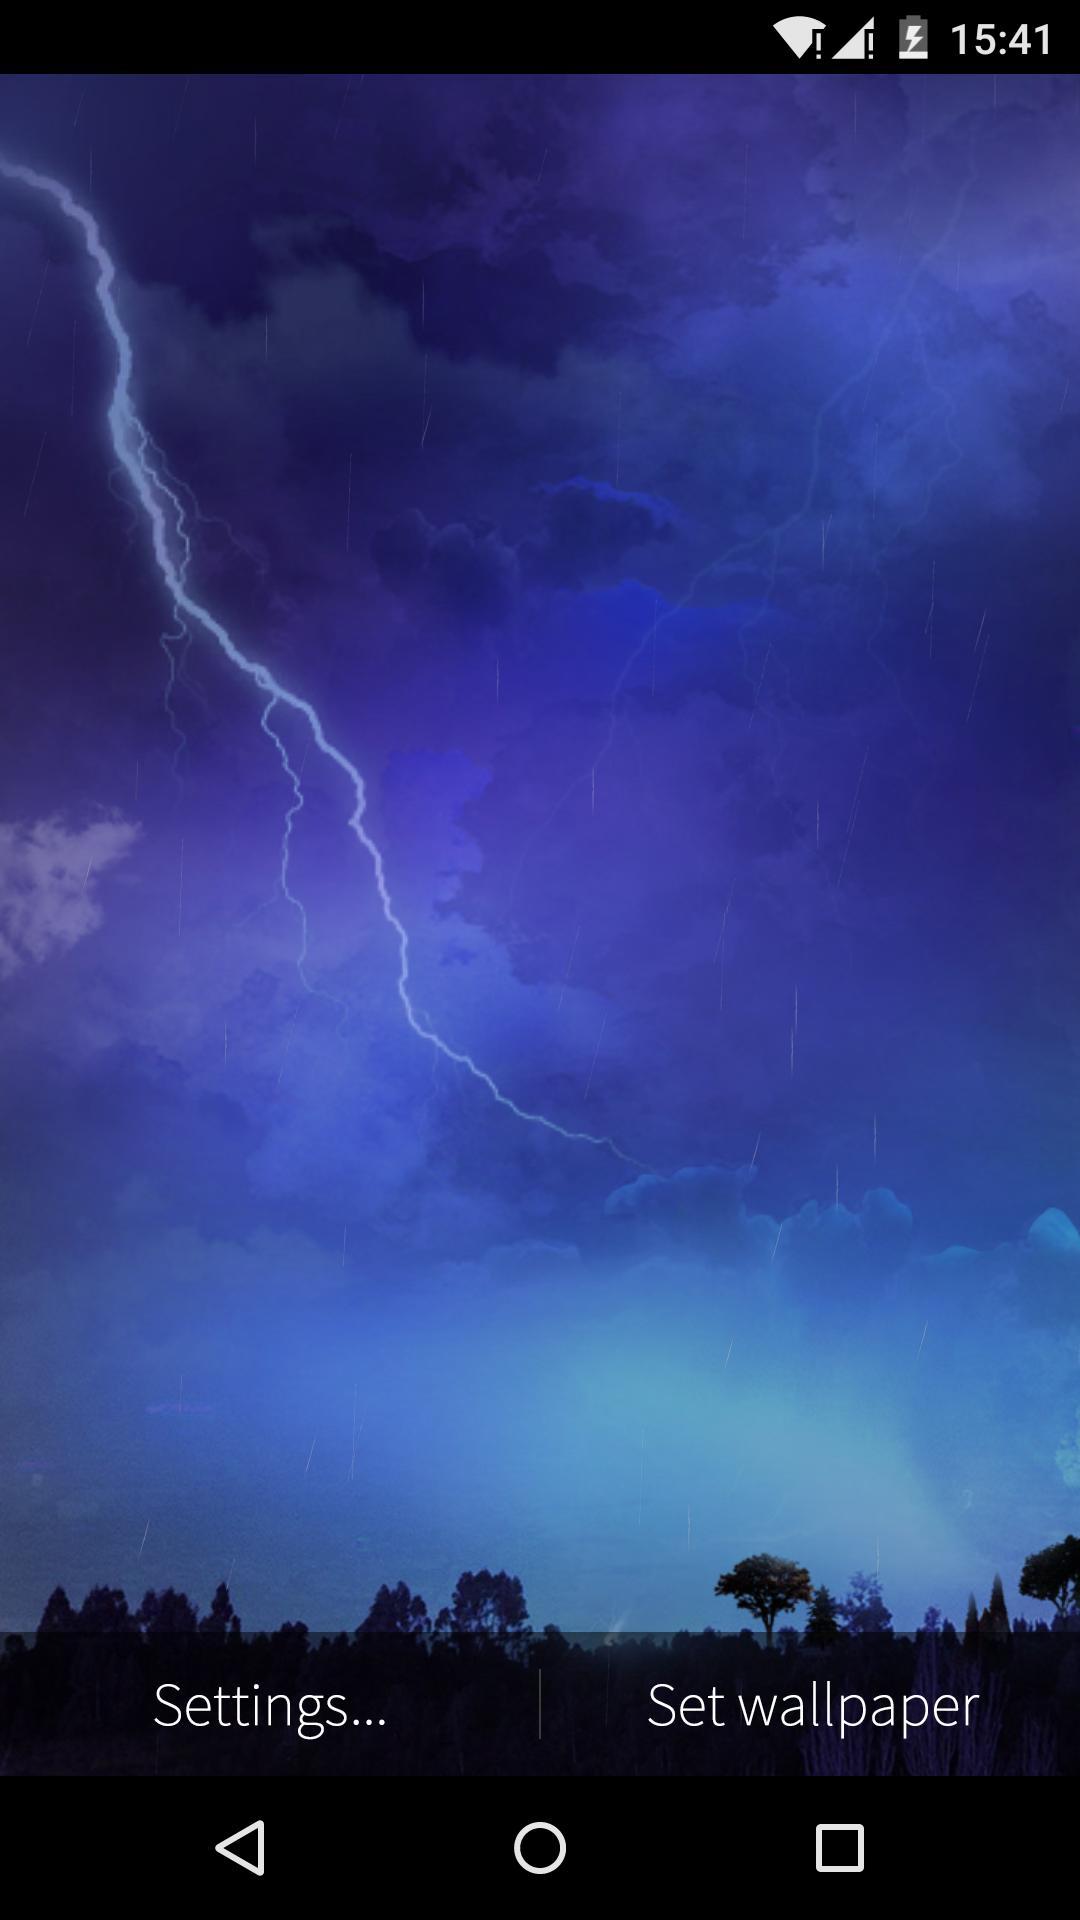 Download Storm Live Wallpaper In High-quality For Your - 壁紙 第 五 人格 桌布 紅 蝶 - HD Wallpaper 